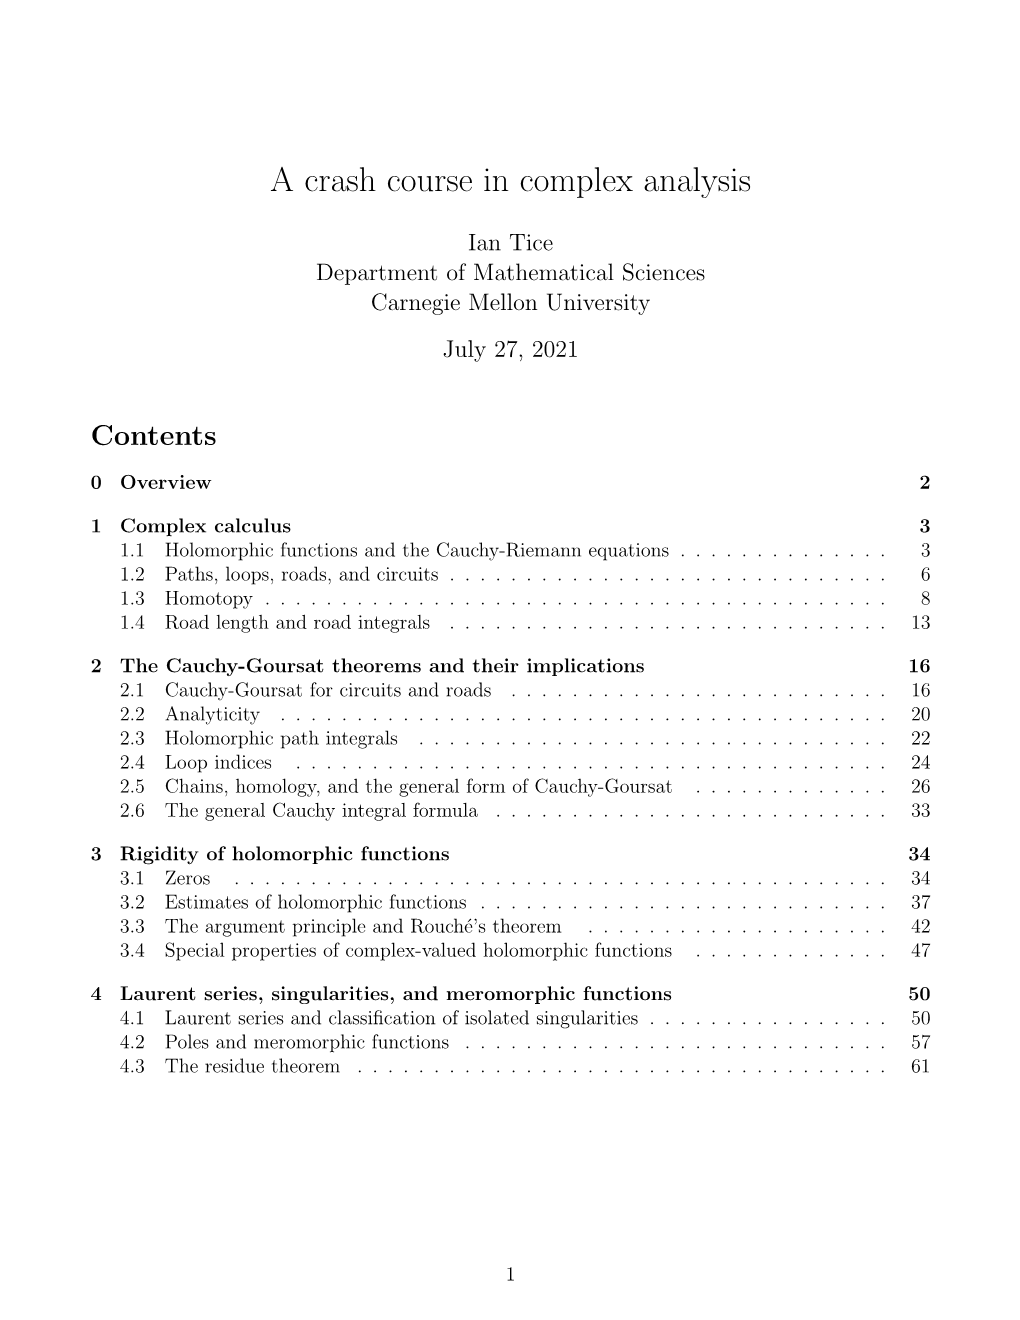 A Crash Course in Complex Analysis